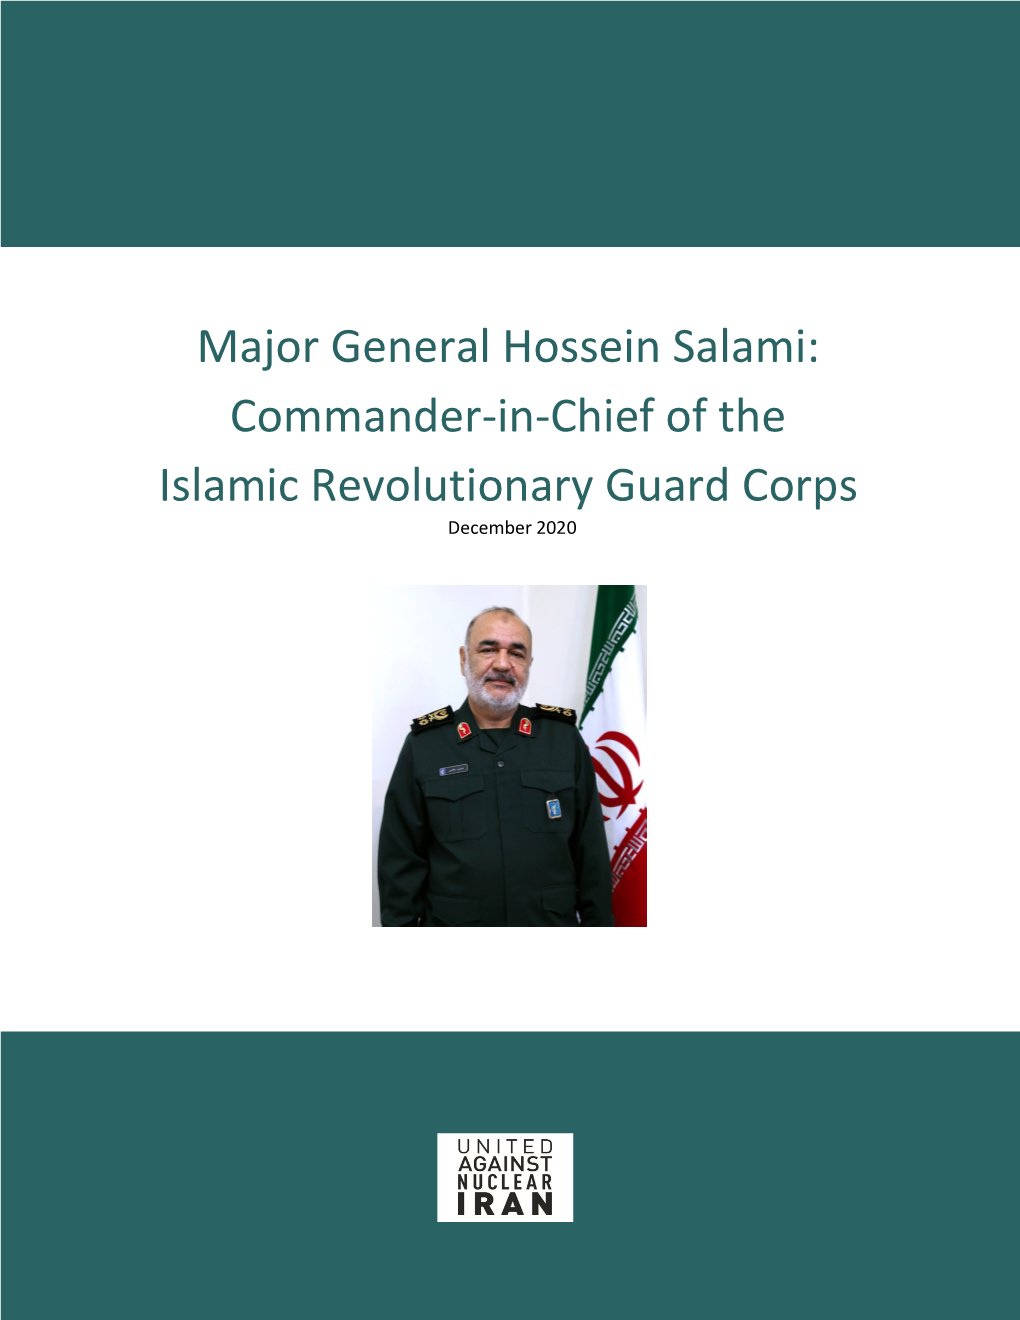 Major General Hossein Salami: Commander-In-Chief of the Islamic Revolutionary Guard Corps December 2020